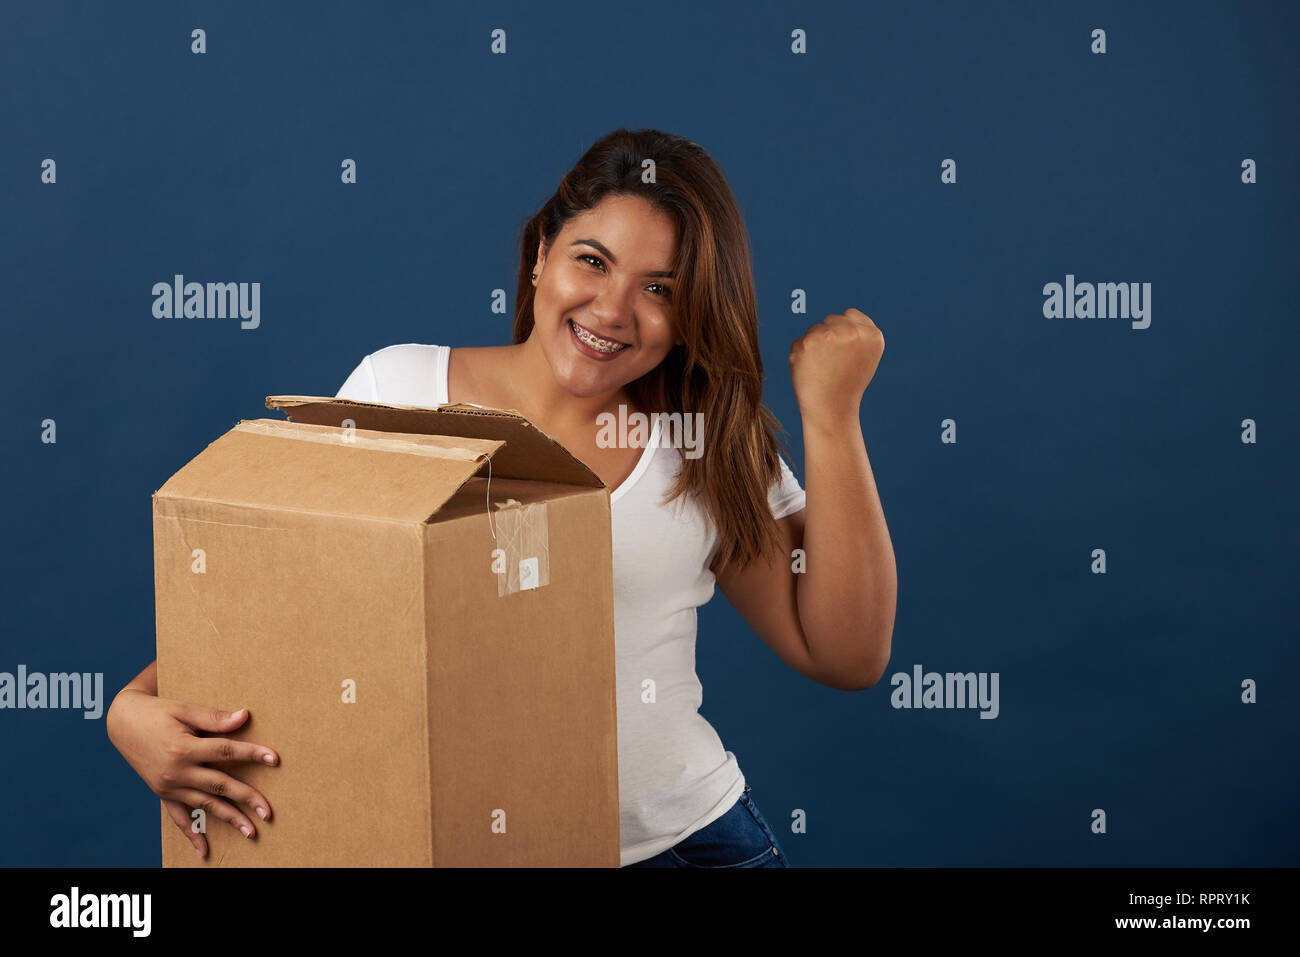 Smiling girl with package holding in hand isolated on blue studio background Stock Photo